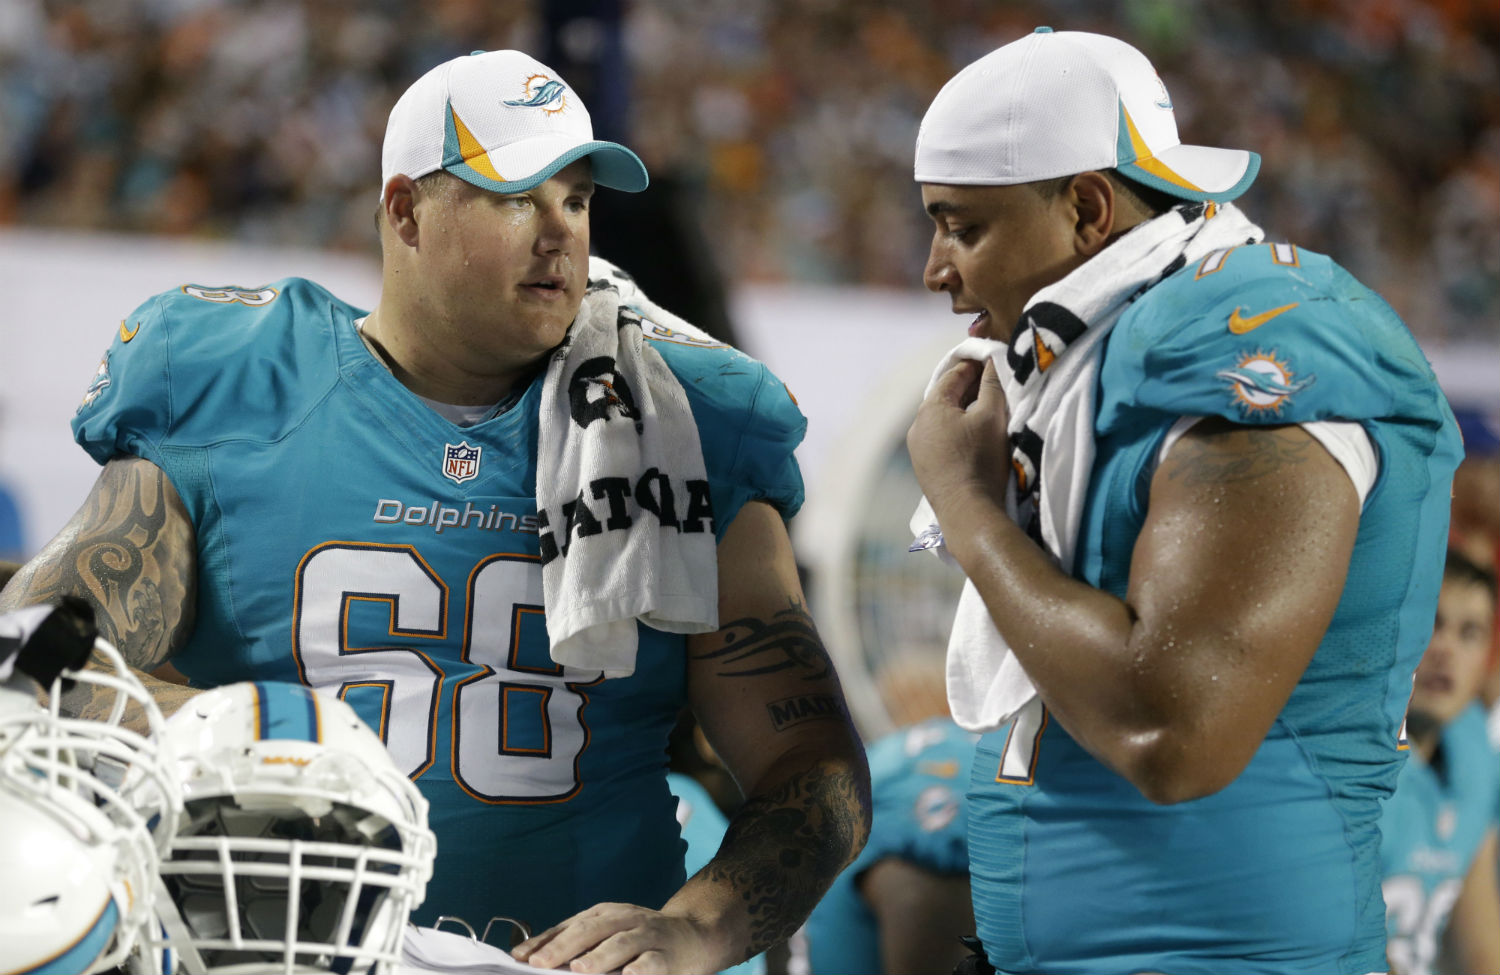 On Reflection: Jay Glazer’s Interview with Richie Incognito